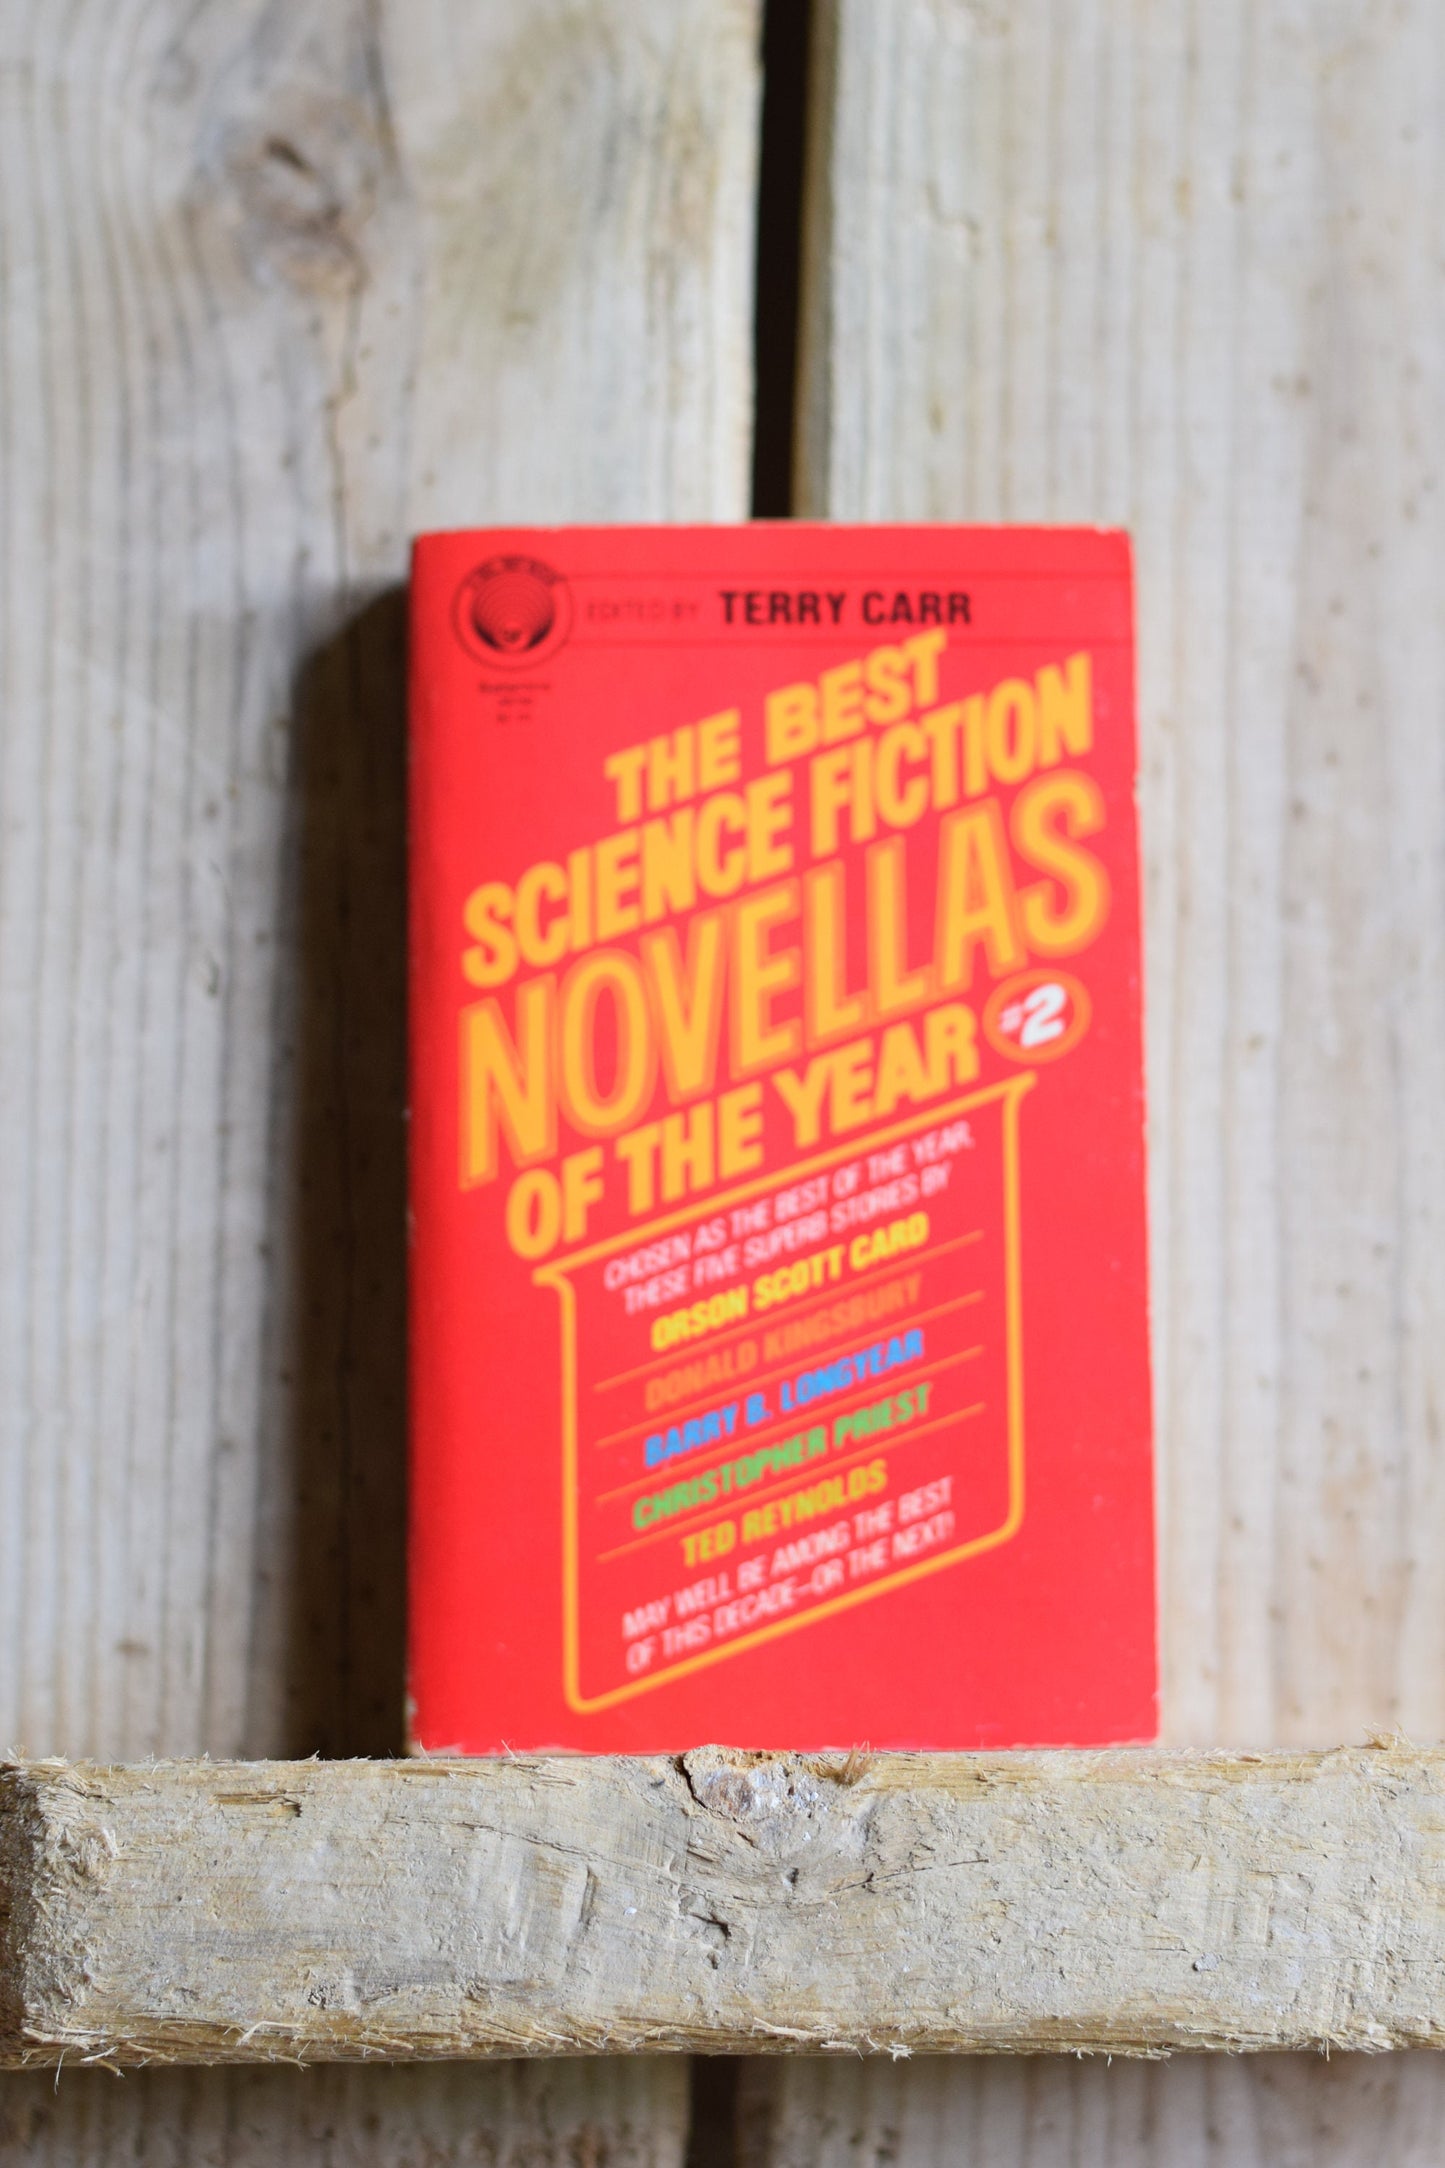 Vintage Sci-fi Paperback: The Best Science Fiction Novellas of the Year #2 - Edited by Terry Carr